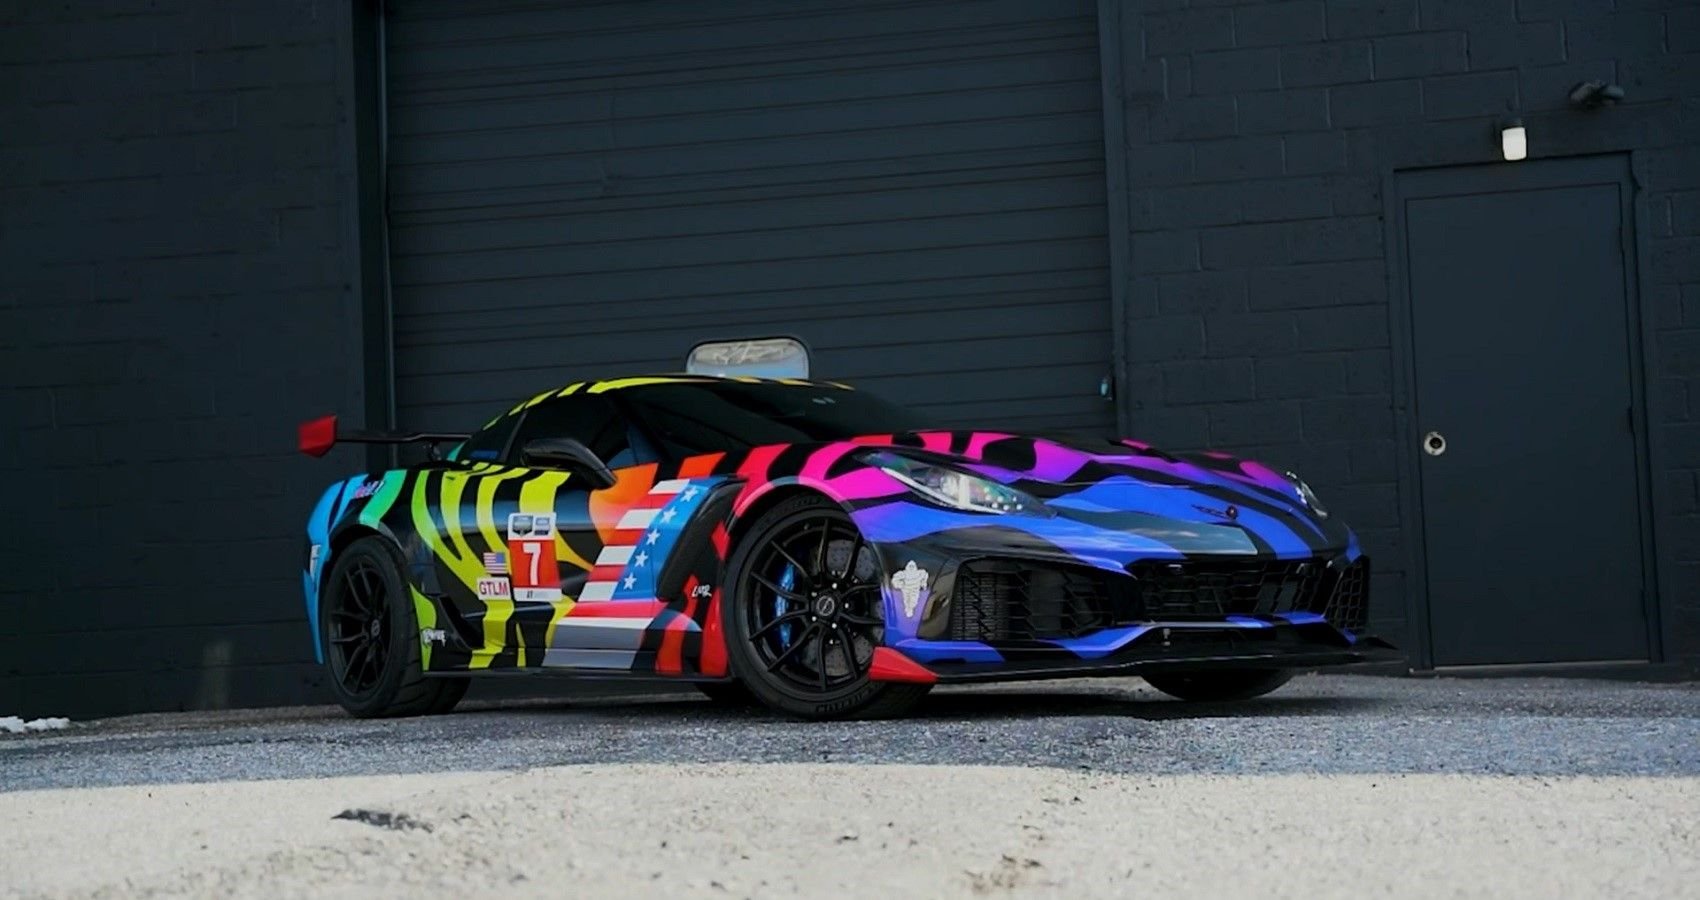 This 1,000-HP Chevrolet Corvette ZR1 Has One Of The Best Liveries We've Ever Seen